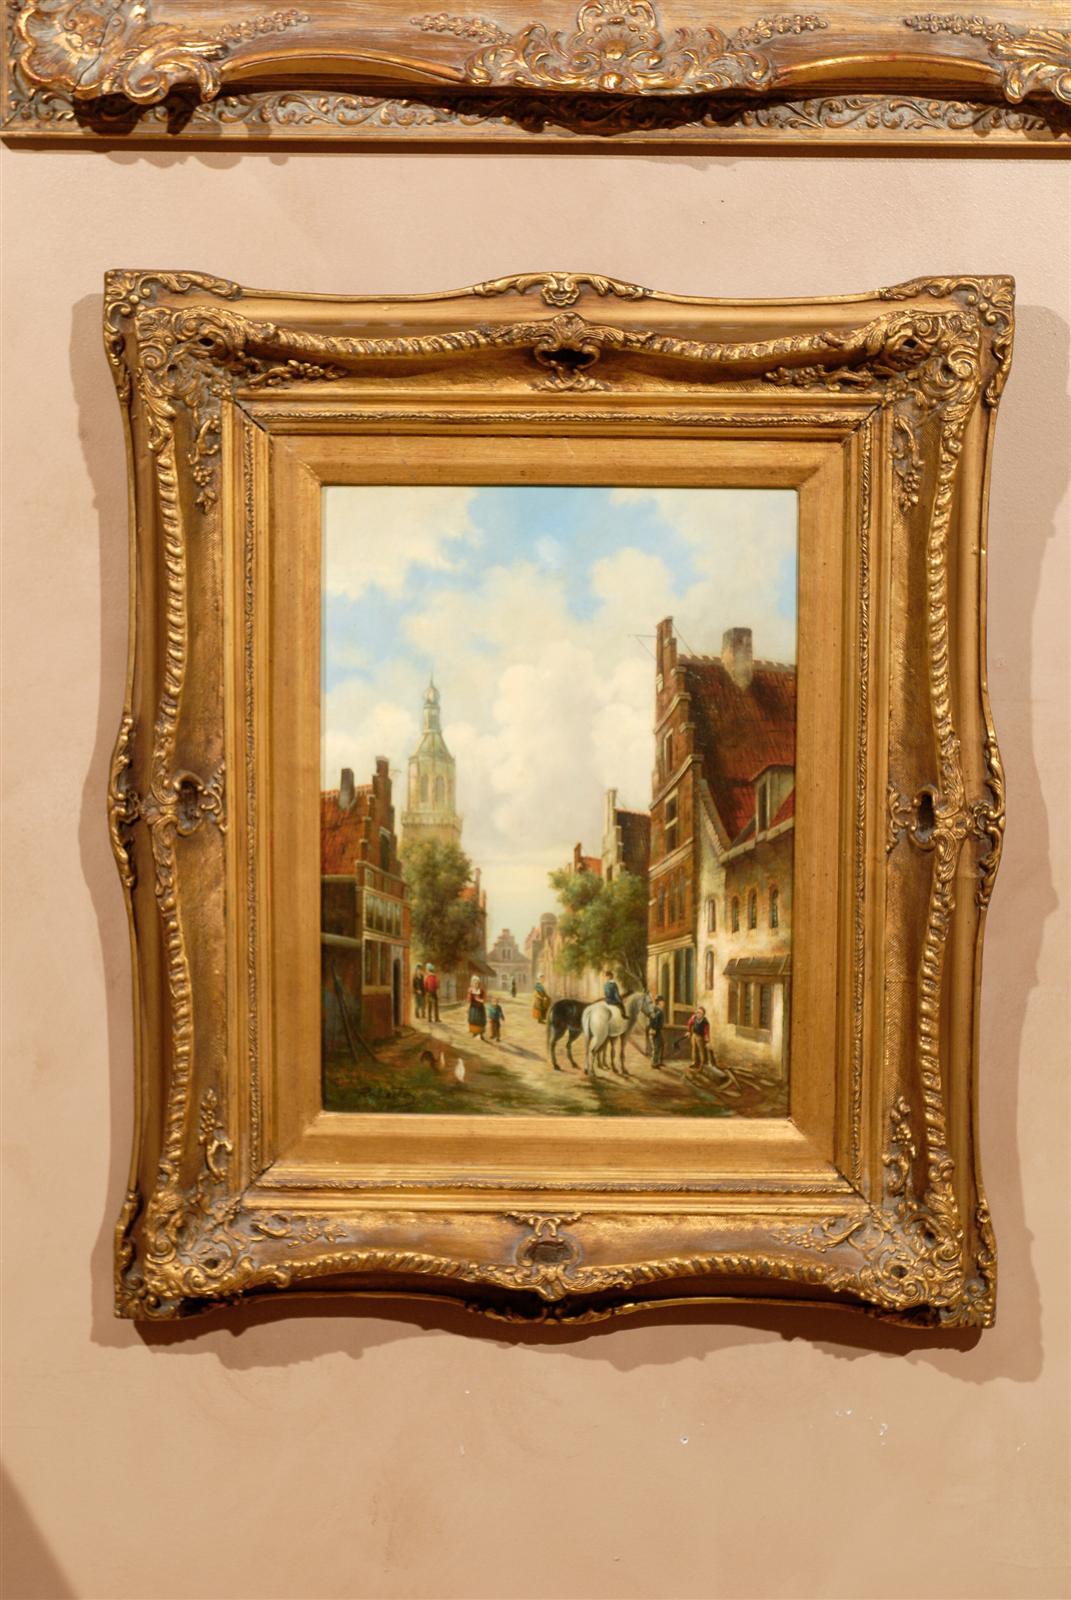 A lovely oil on panel village scene, signed Roberts in left hand corner.
The actual painting is 12 in W x 16 in. H.